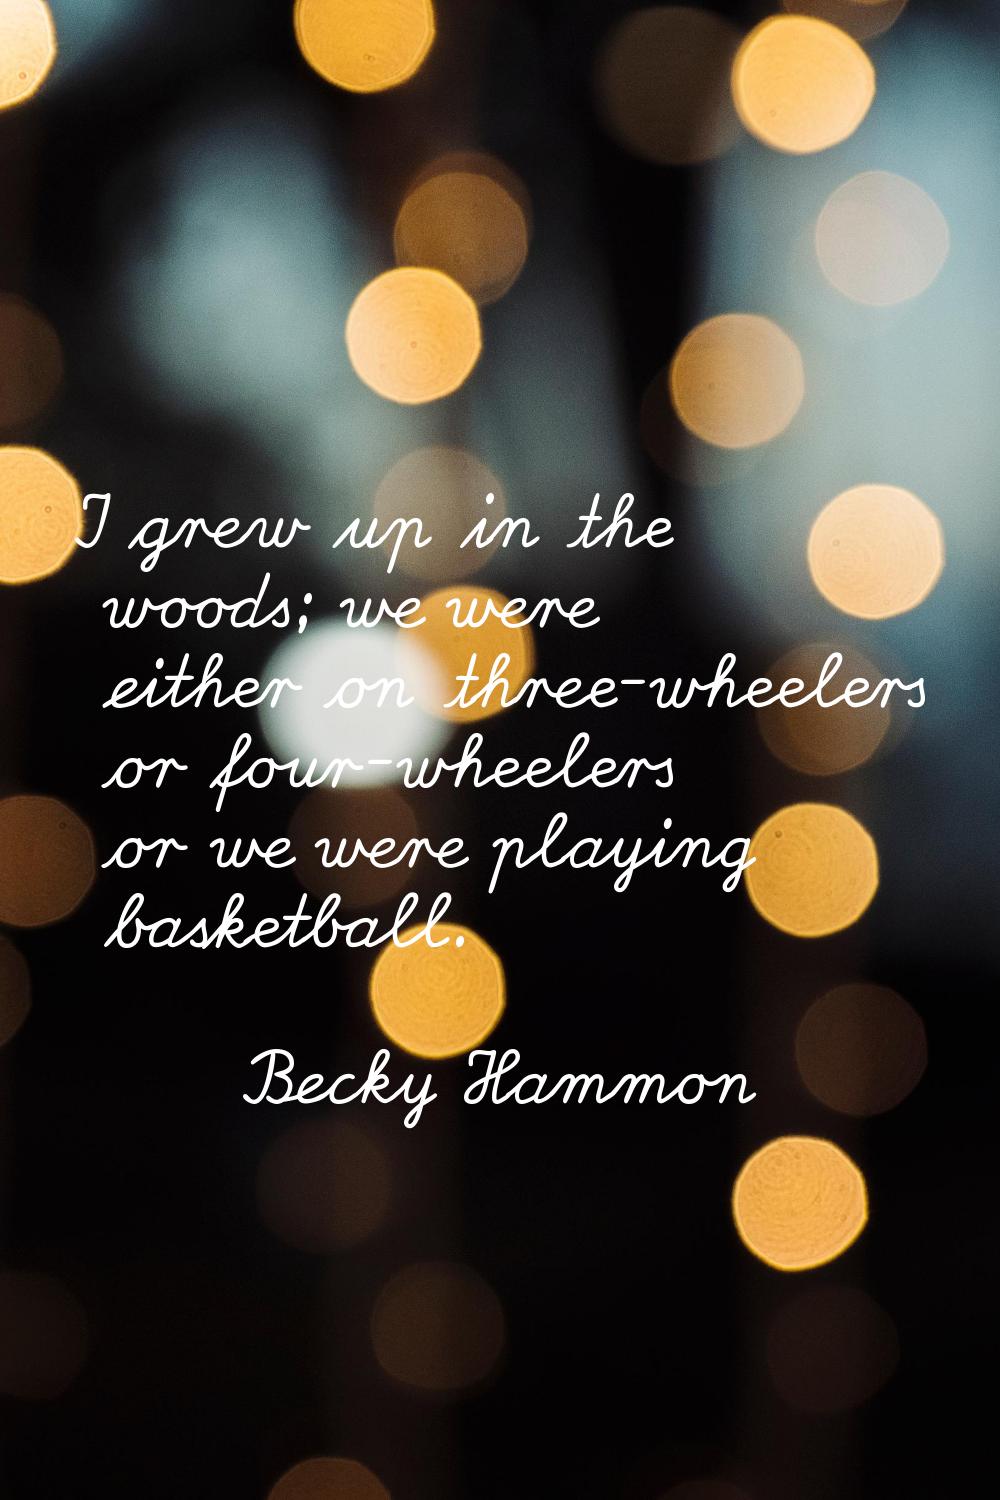 I grew up in the woods; we were either on three-wheelers or four-wheelers or we were playing basket